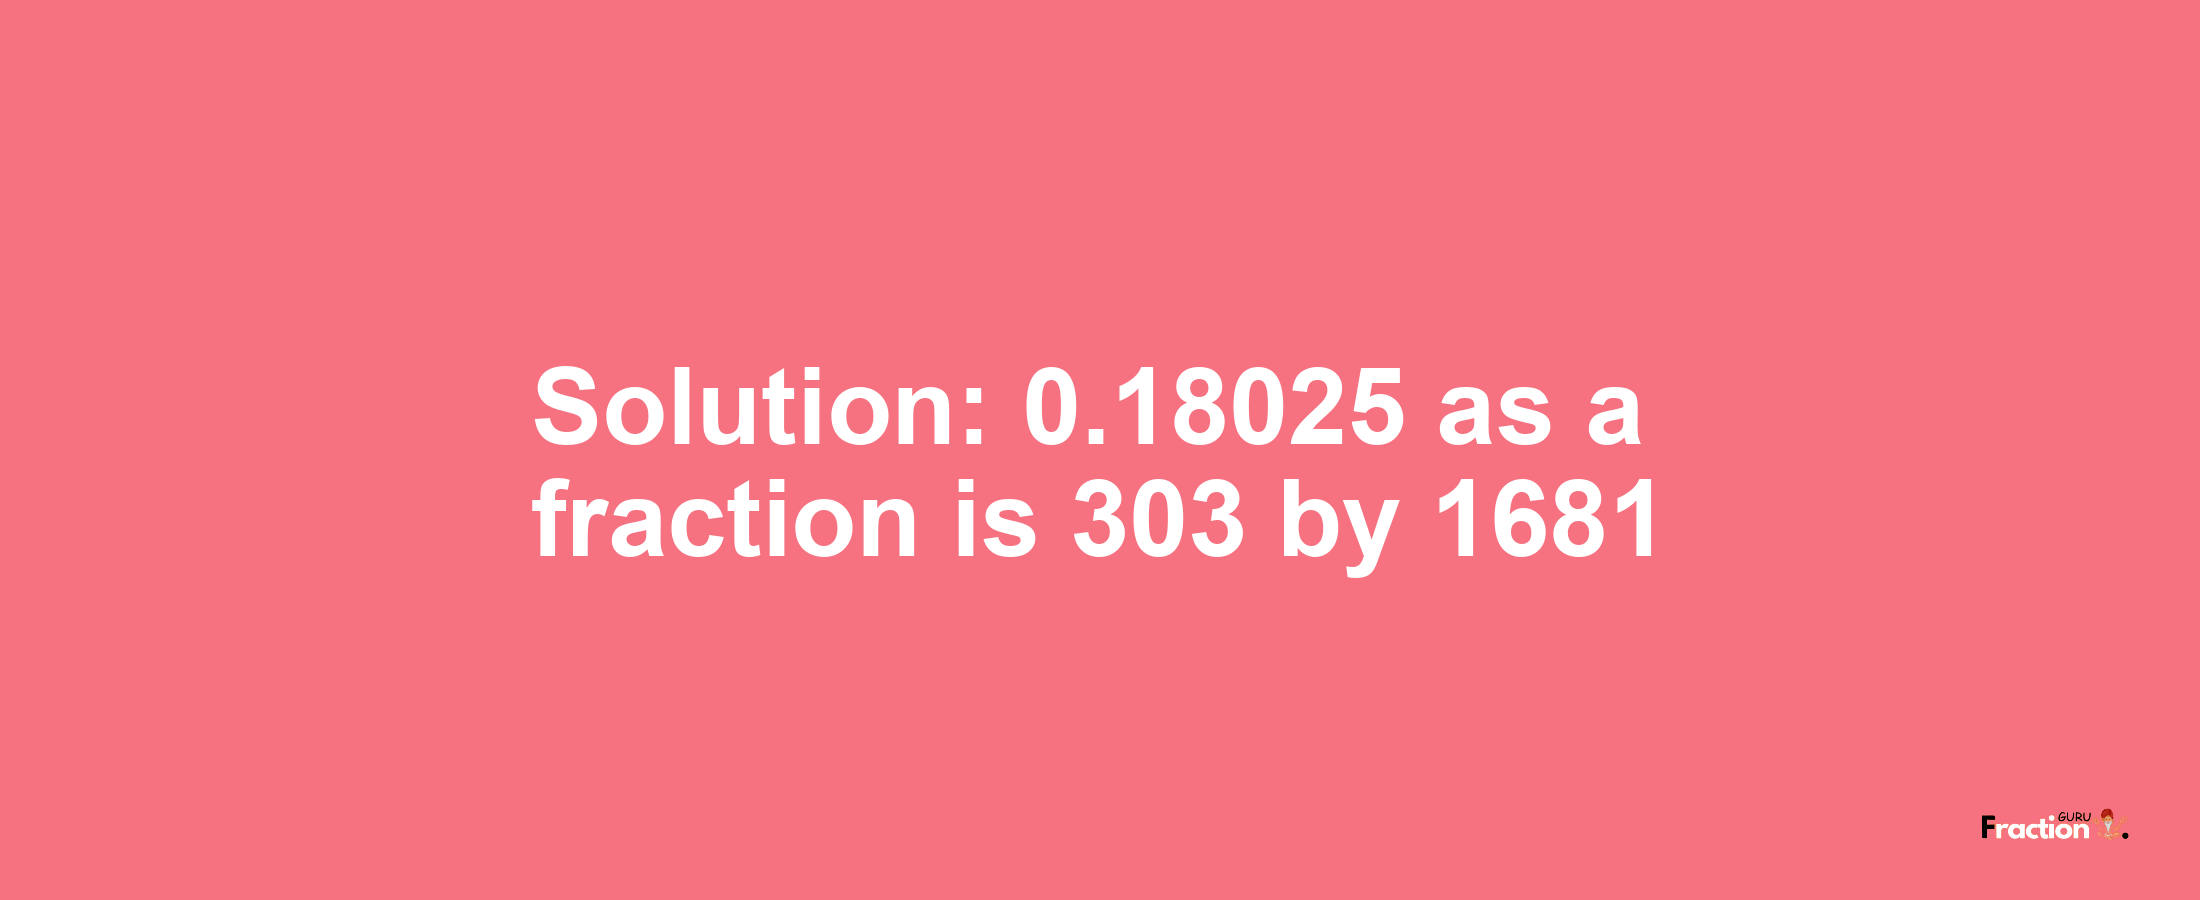 Solution:0.18025 as a fraction is 303/1681